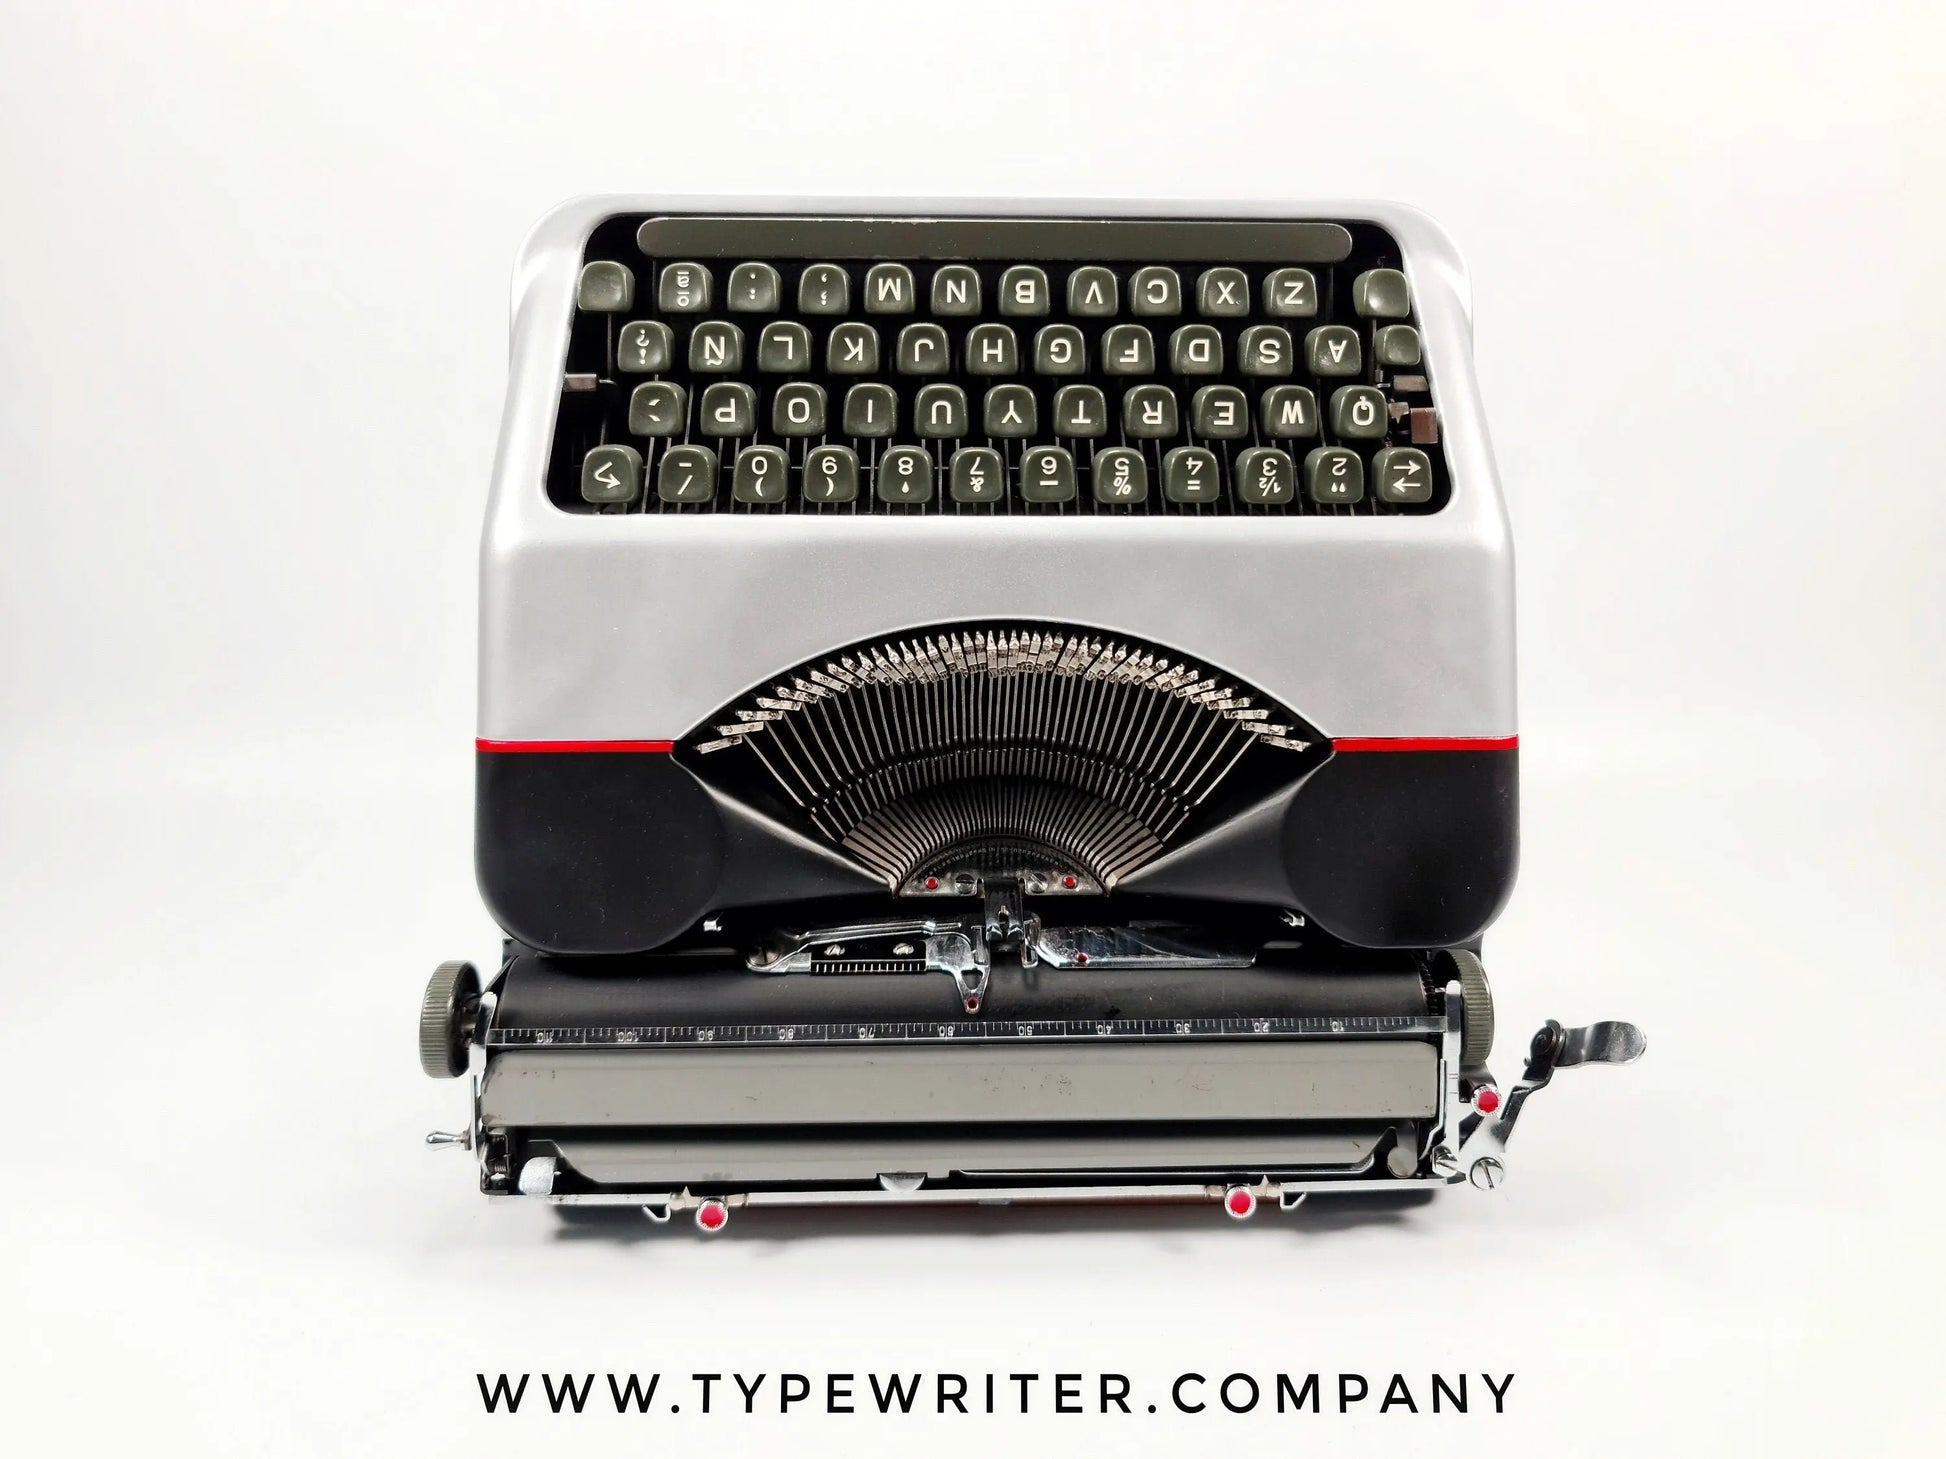 Hermes Baby Silver Typewriter, Vintage, Mint Condition, Manual Portable, Professionally Serviced by Typewriter.Company - ElGranero Typewriter.Company